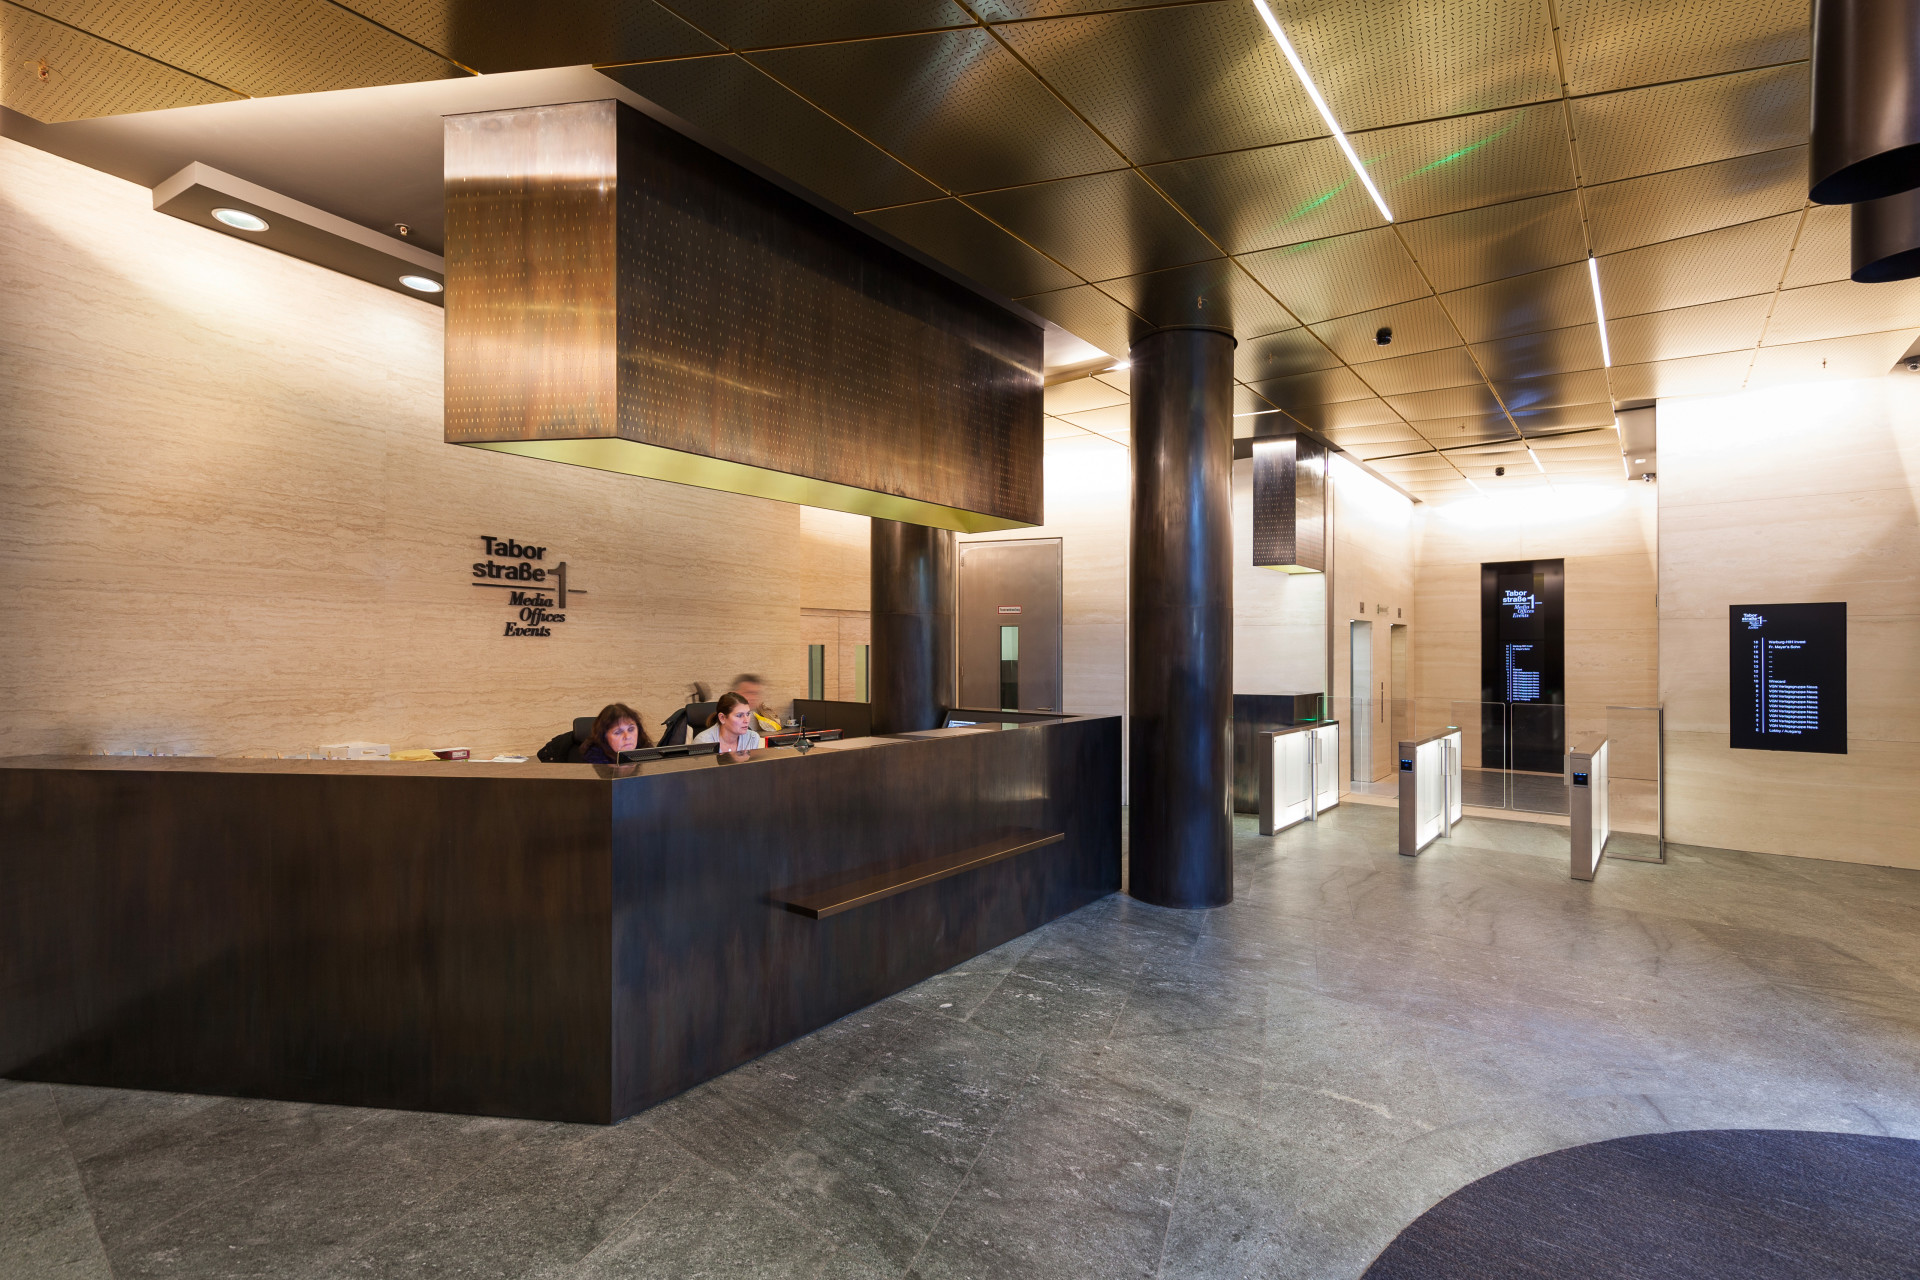 Entrance area of Taborstraße 1 with black reception desk and hanging gold cube as design element